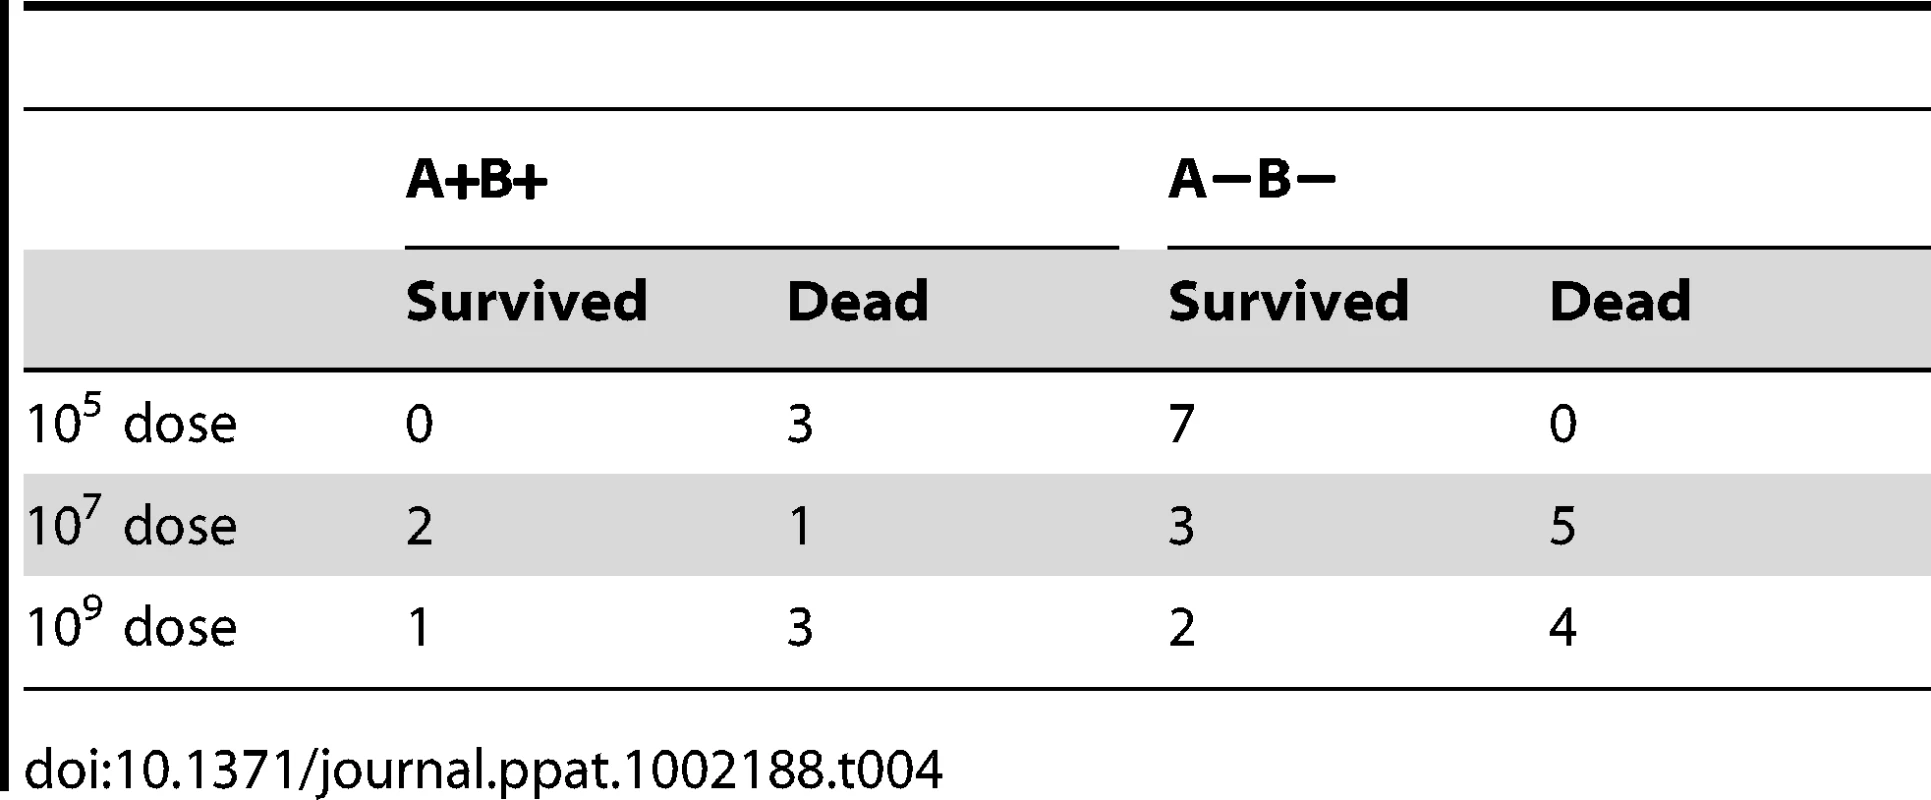 A+B+ and A−B− phenotypes and survival and death of rabbits from G4 challenge experiment.